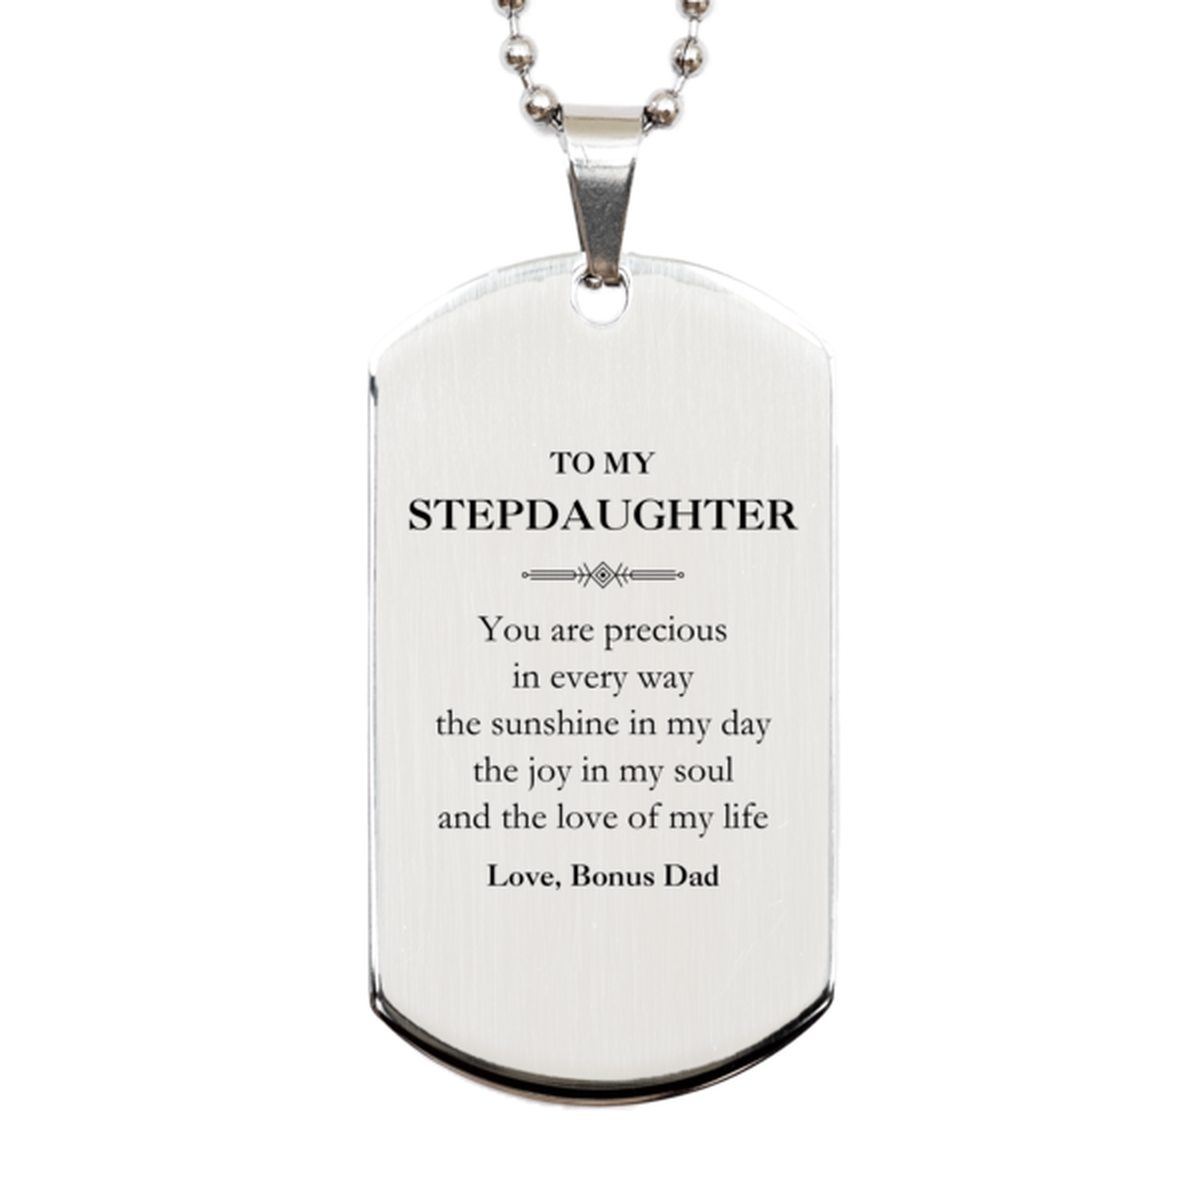 Graduation Gifts for Stepdaughter Silver Dog Tag Present from Bonus Dad, Christmas Stepdaughter Birthday Gifts Stepdaughter You are precious in every way the sunshine in my day. Love, Bonus Dad